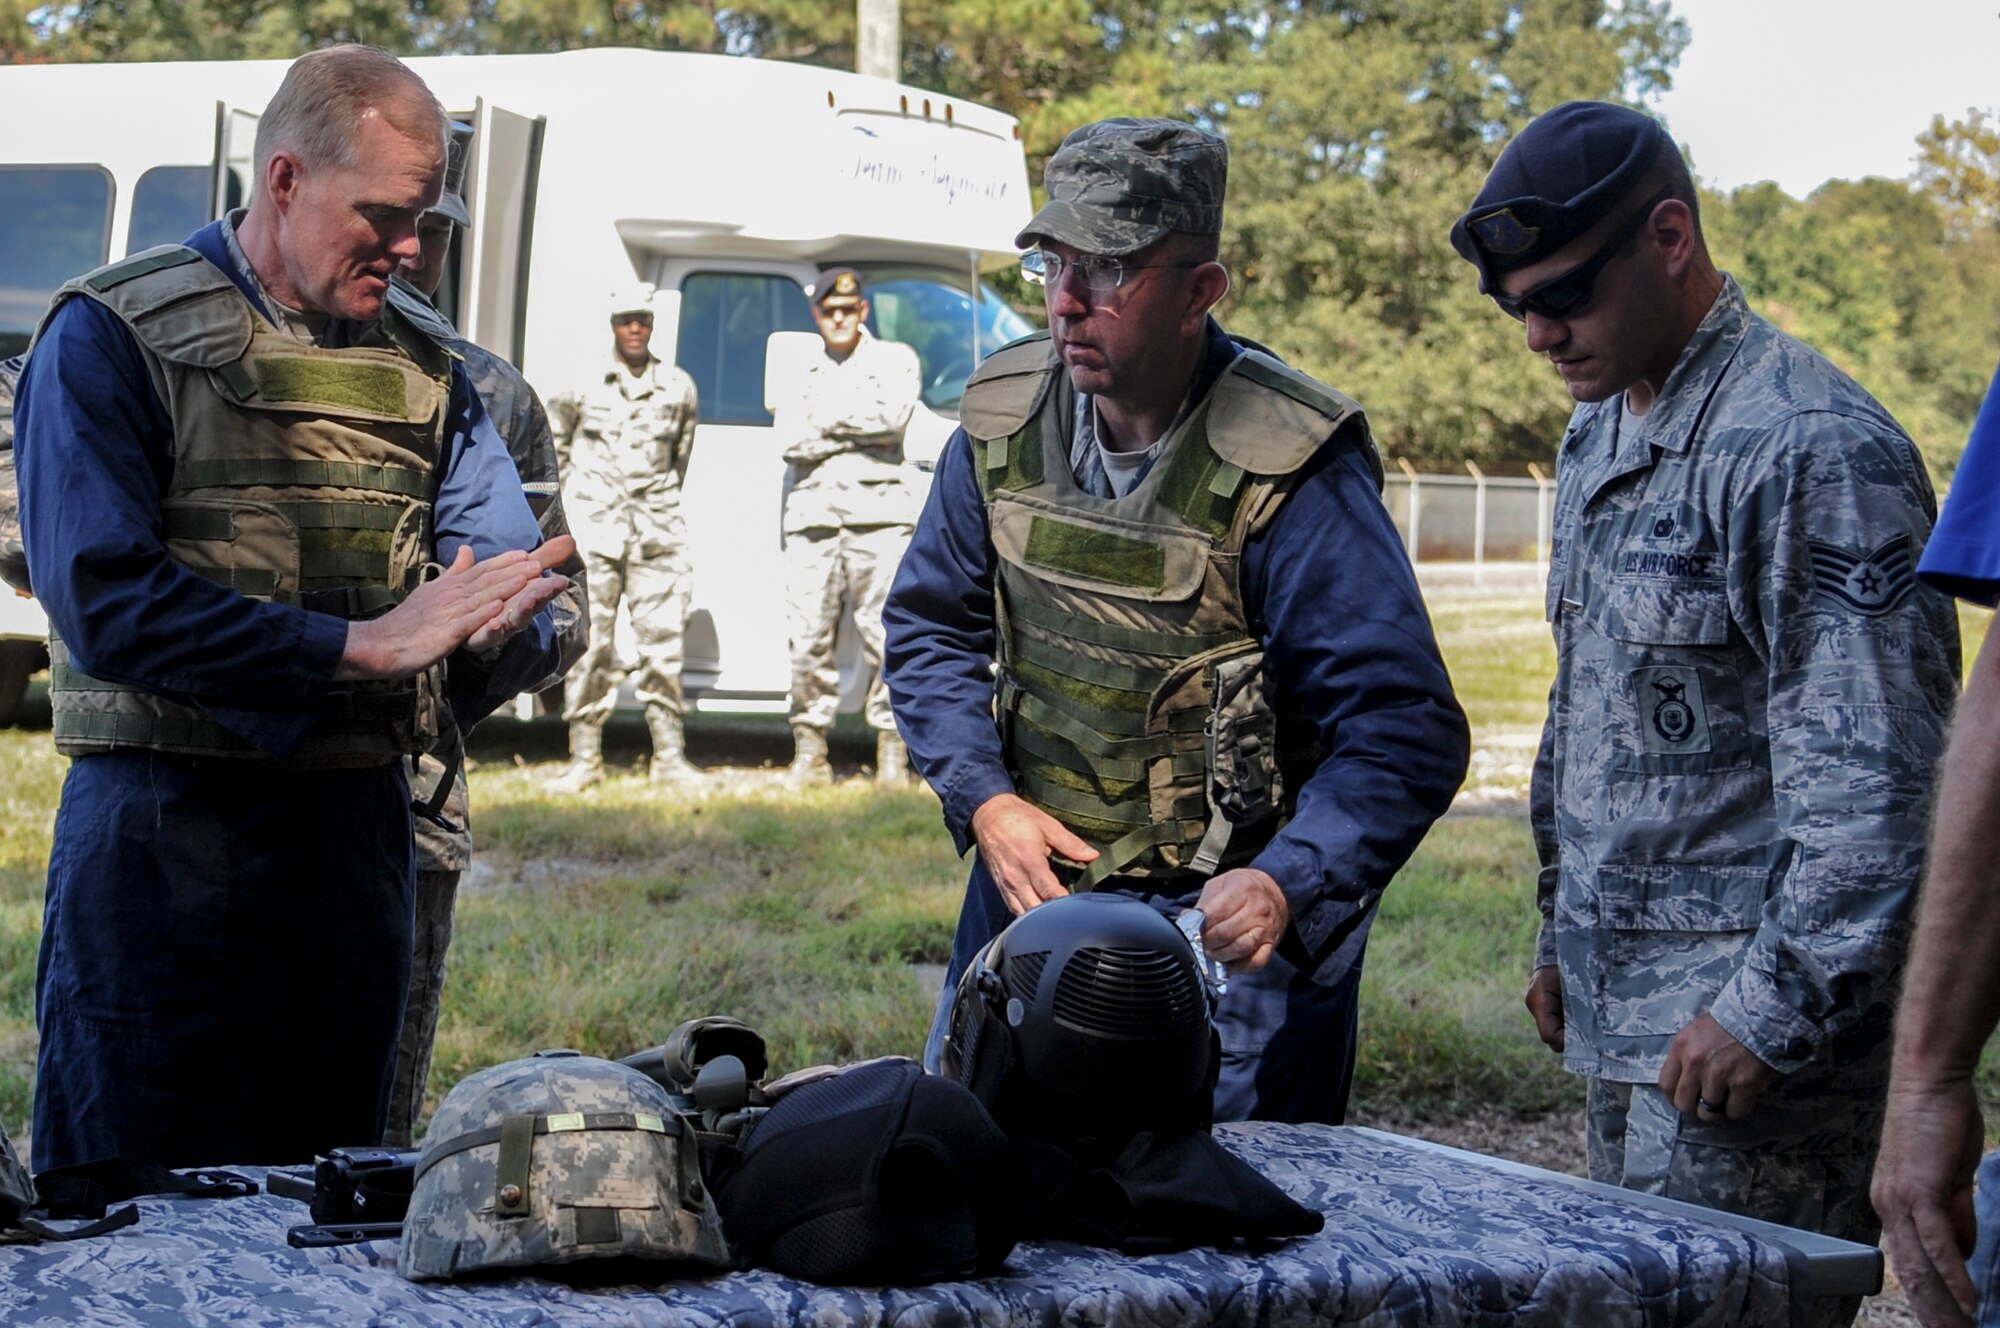 From left, Chief Master Sgt. of the Air Force James Cody, Chief Master Sgt. Jeffrey Craver and Staff Sgt. John Makripodis gear up before participating in a tactical operation exercise at the 4th Security Forces Squadron shoot house  Oct. 9, 2014, at Seymour Johnson Air Force Base, N.C. Carver is 4th Fighter Wing command chief and Makripodis is with the 4th SFS. (U.S. Air Force photo/Airman 1st Class Ashley Thum)